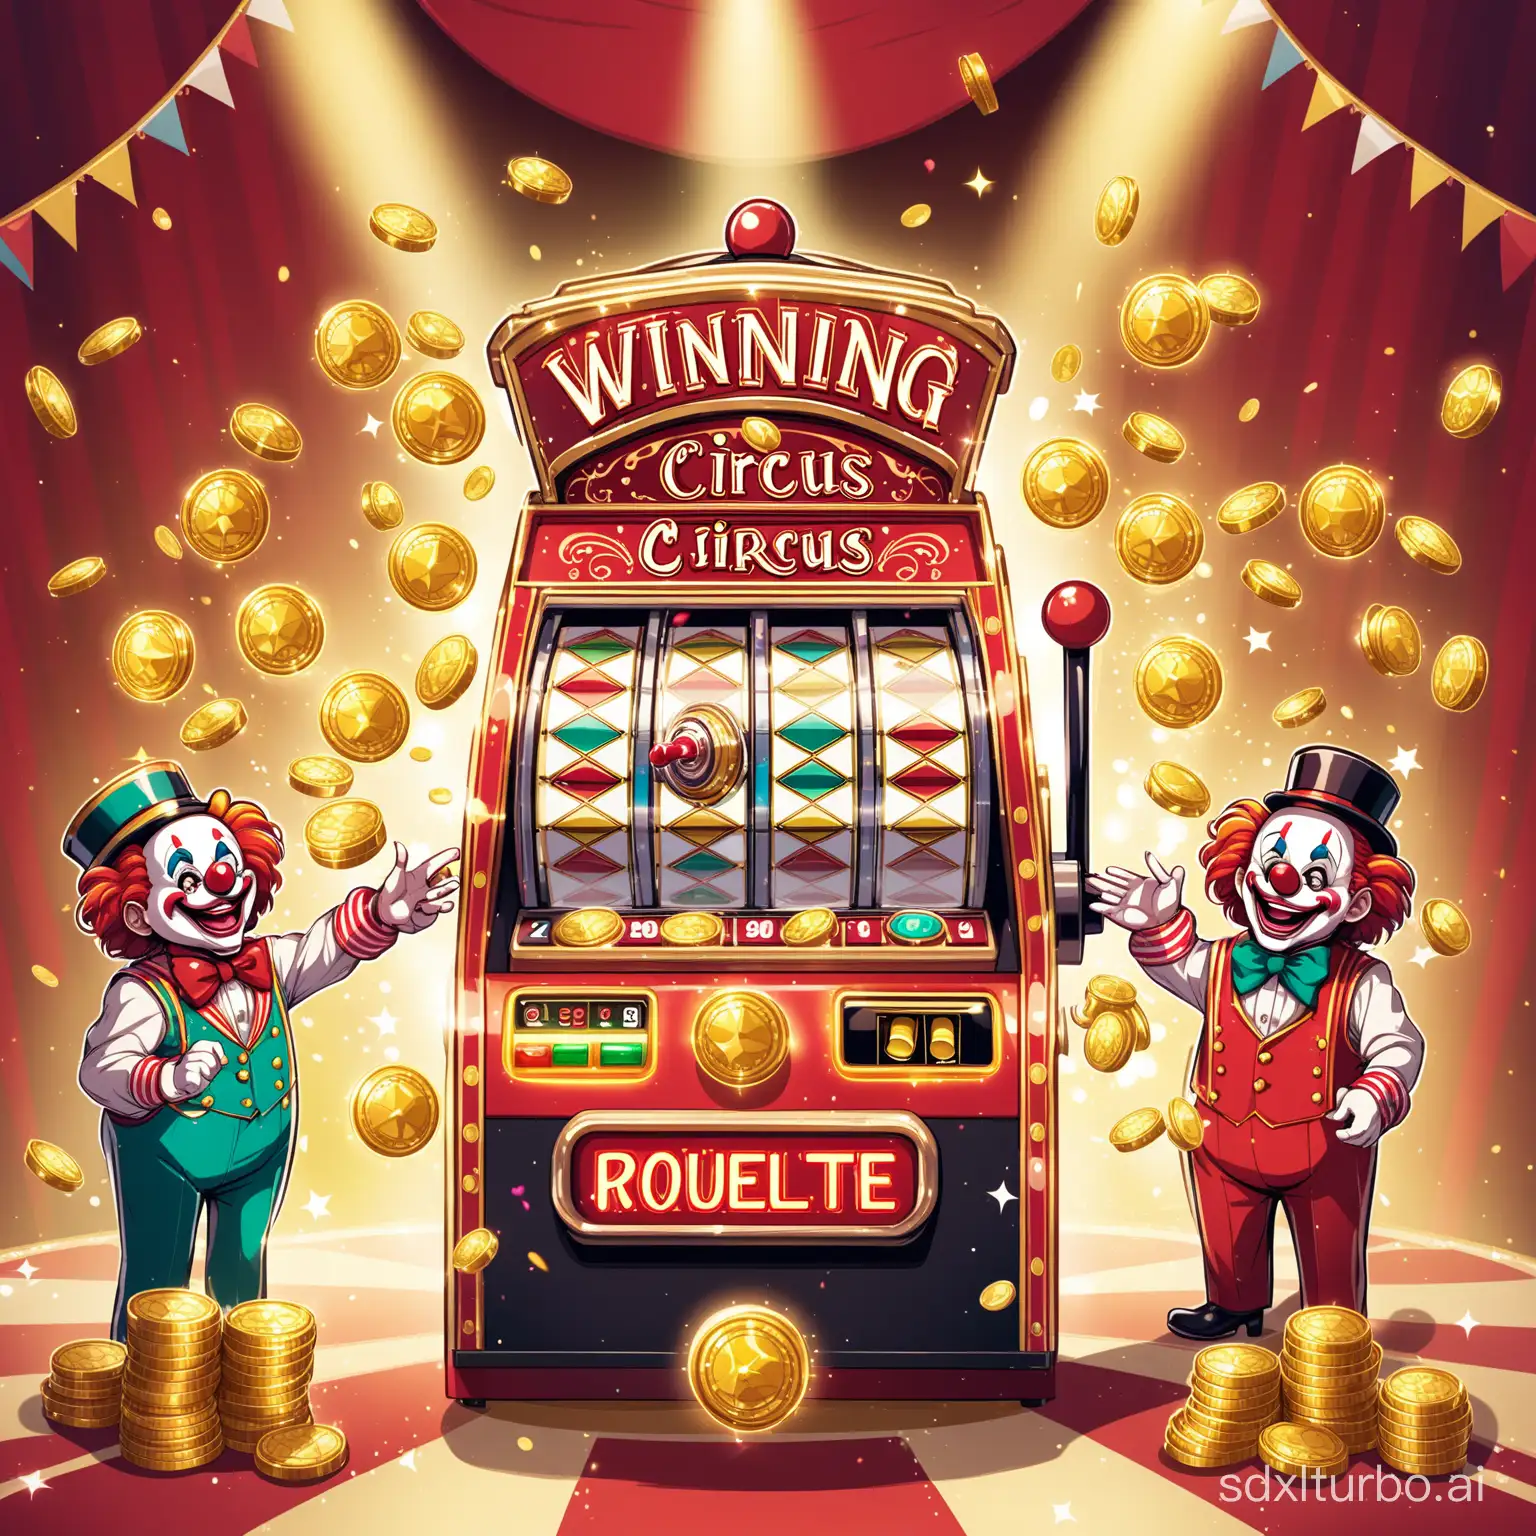 Push coin machine, roulette, clown, circus, gold coins, points, winning